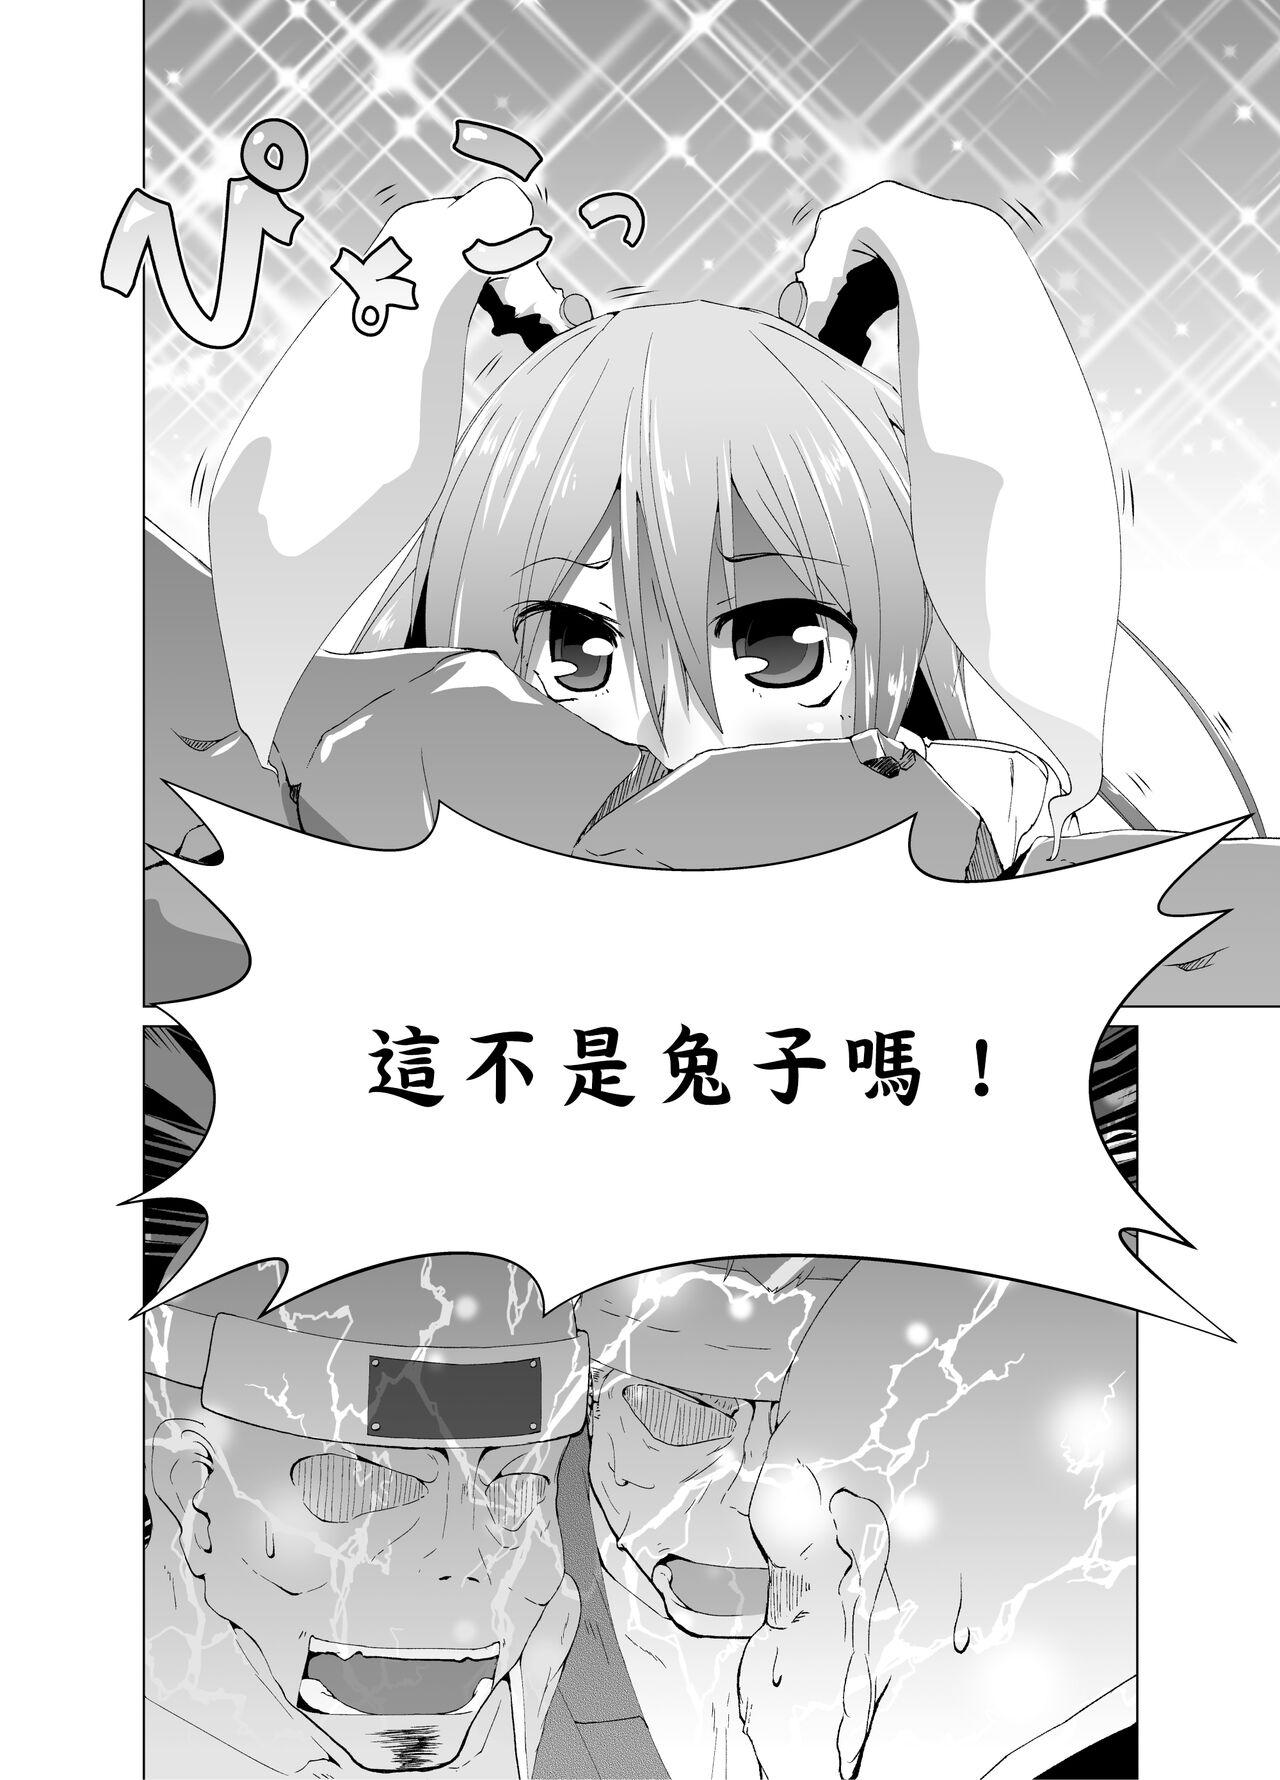 Cock 狂気!人喰いウサギ - Touhou project Flash - Page 6